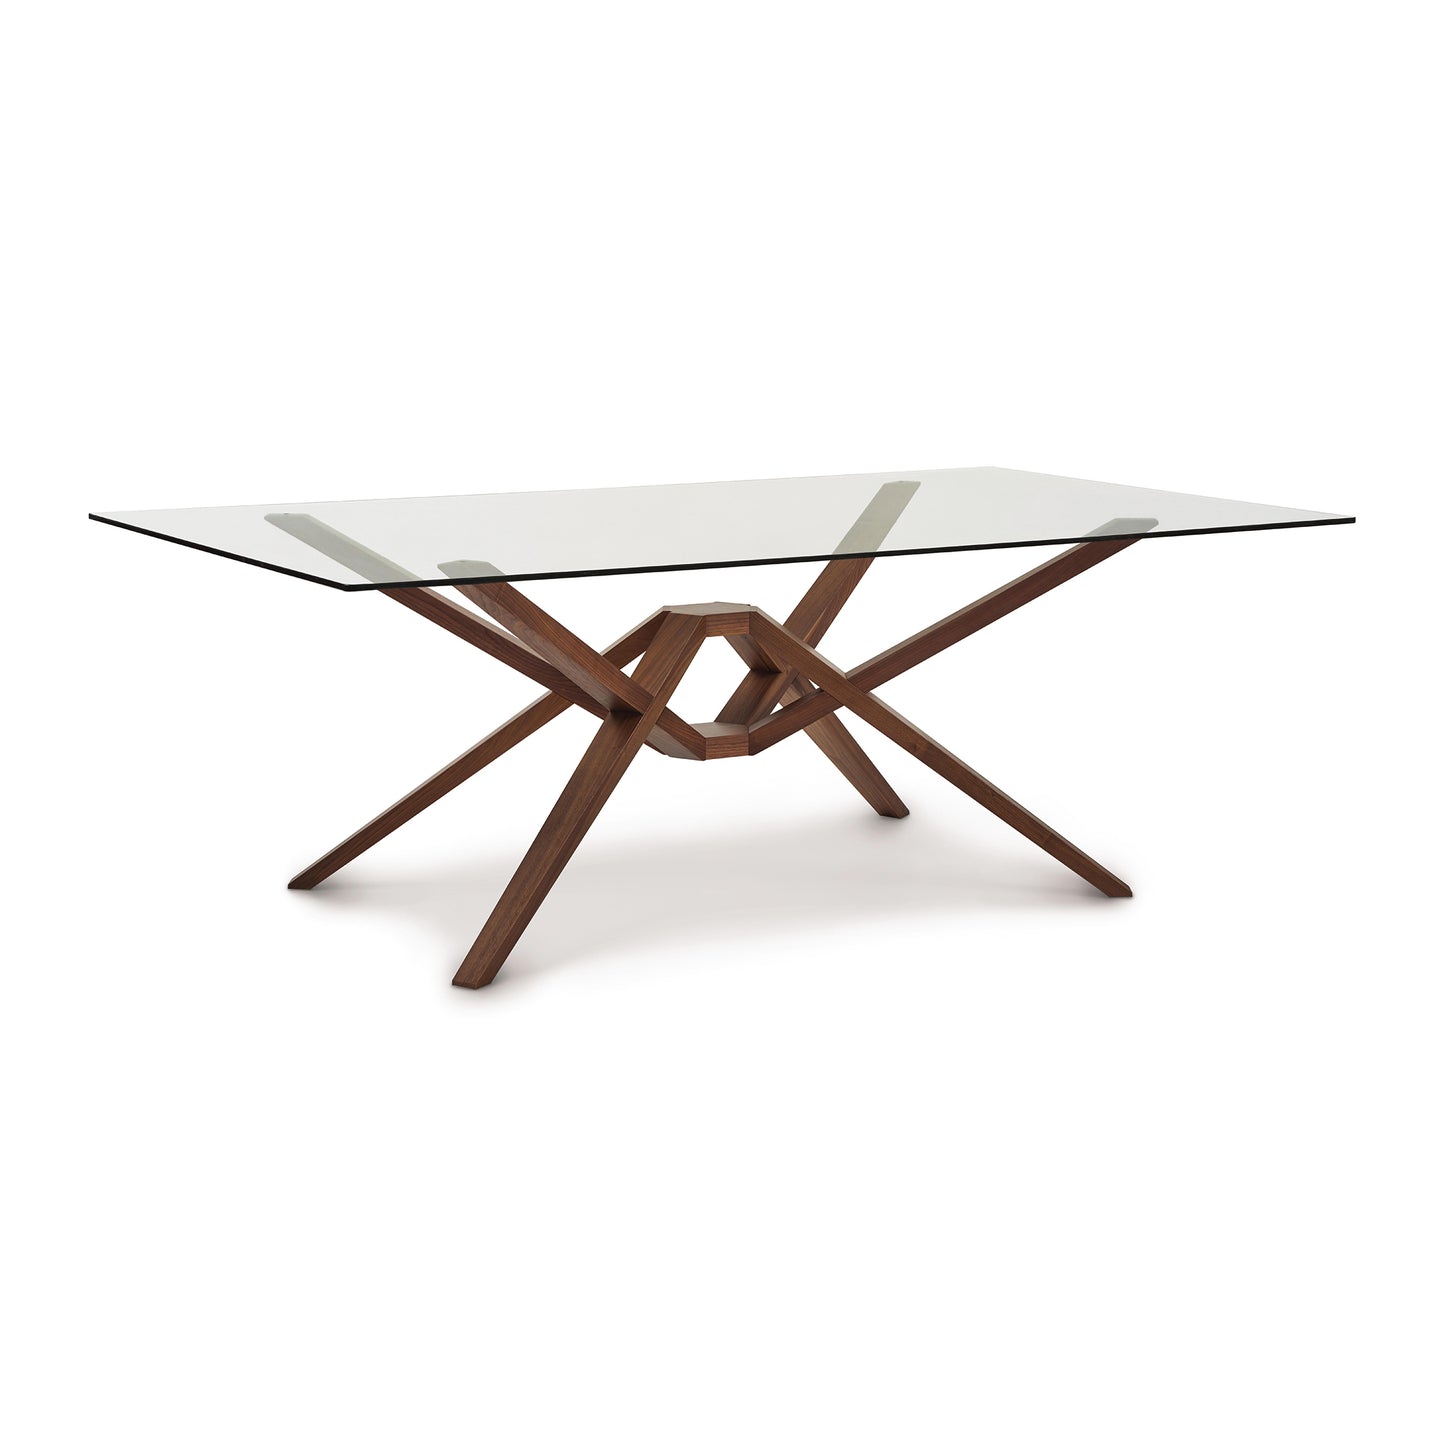 An Copeland Furniture Exeter Rectangular Glass Top Table with a wooden base featuring an intricate crossing design crafted by Vermont craftsmen on a white background.